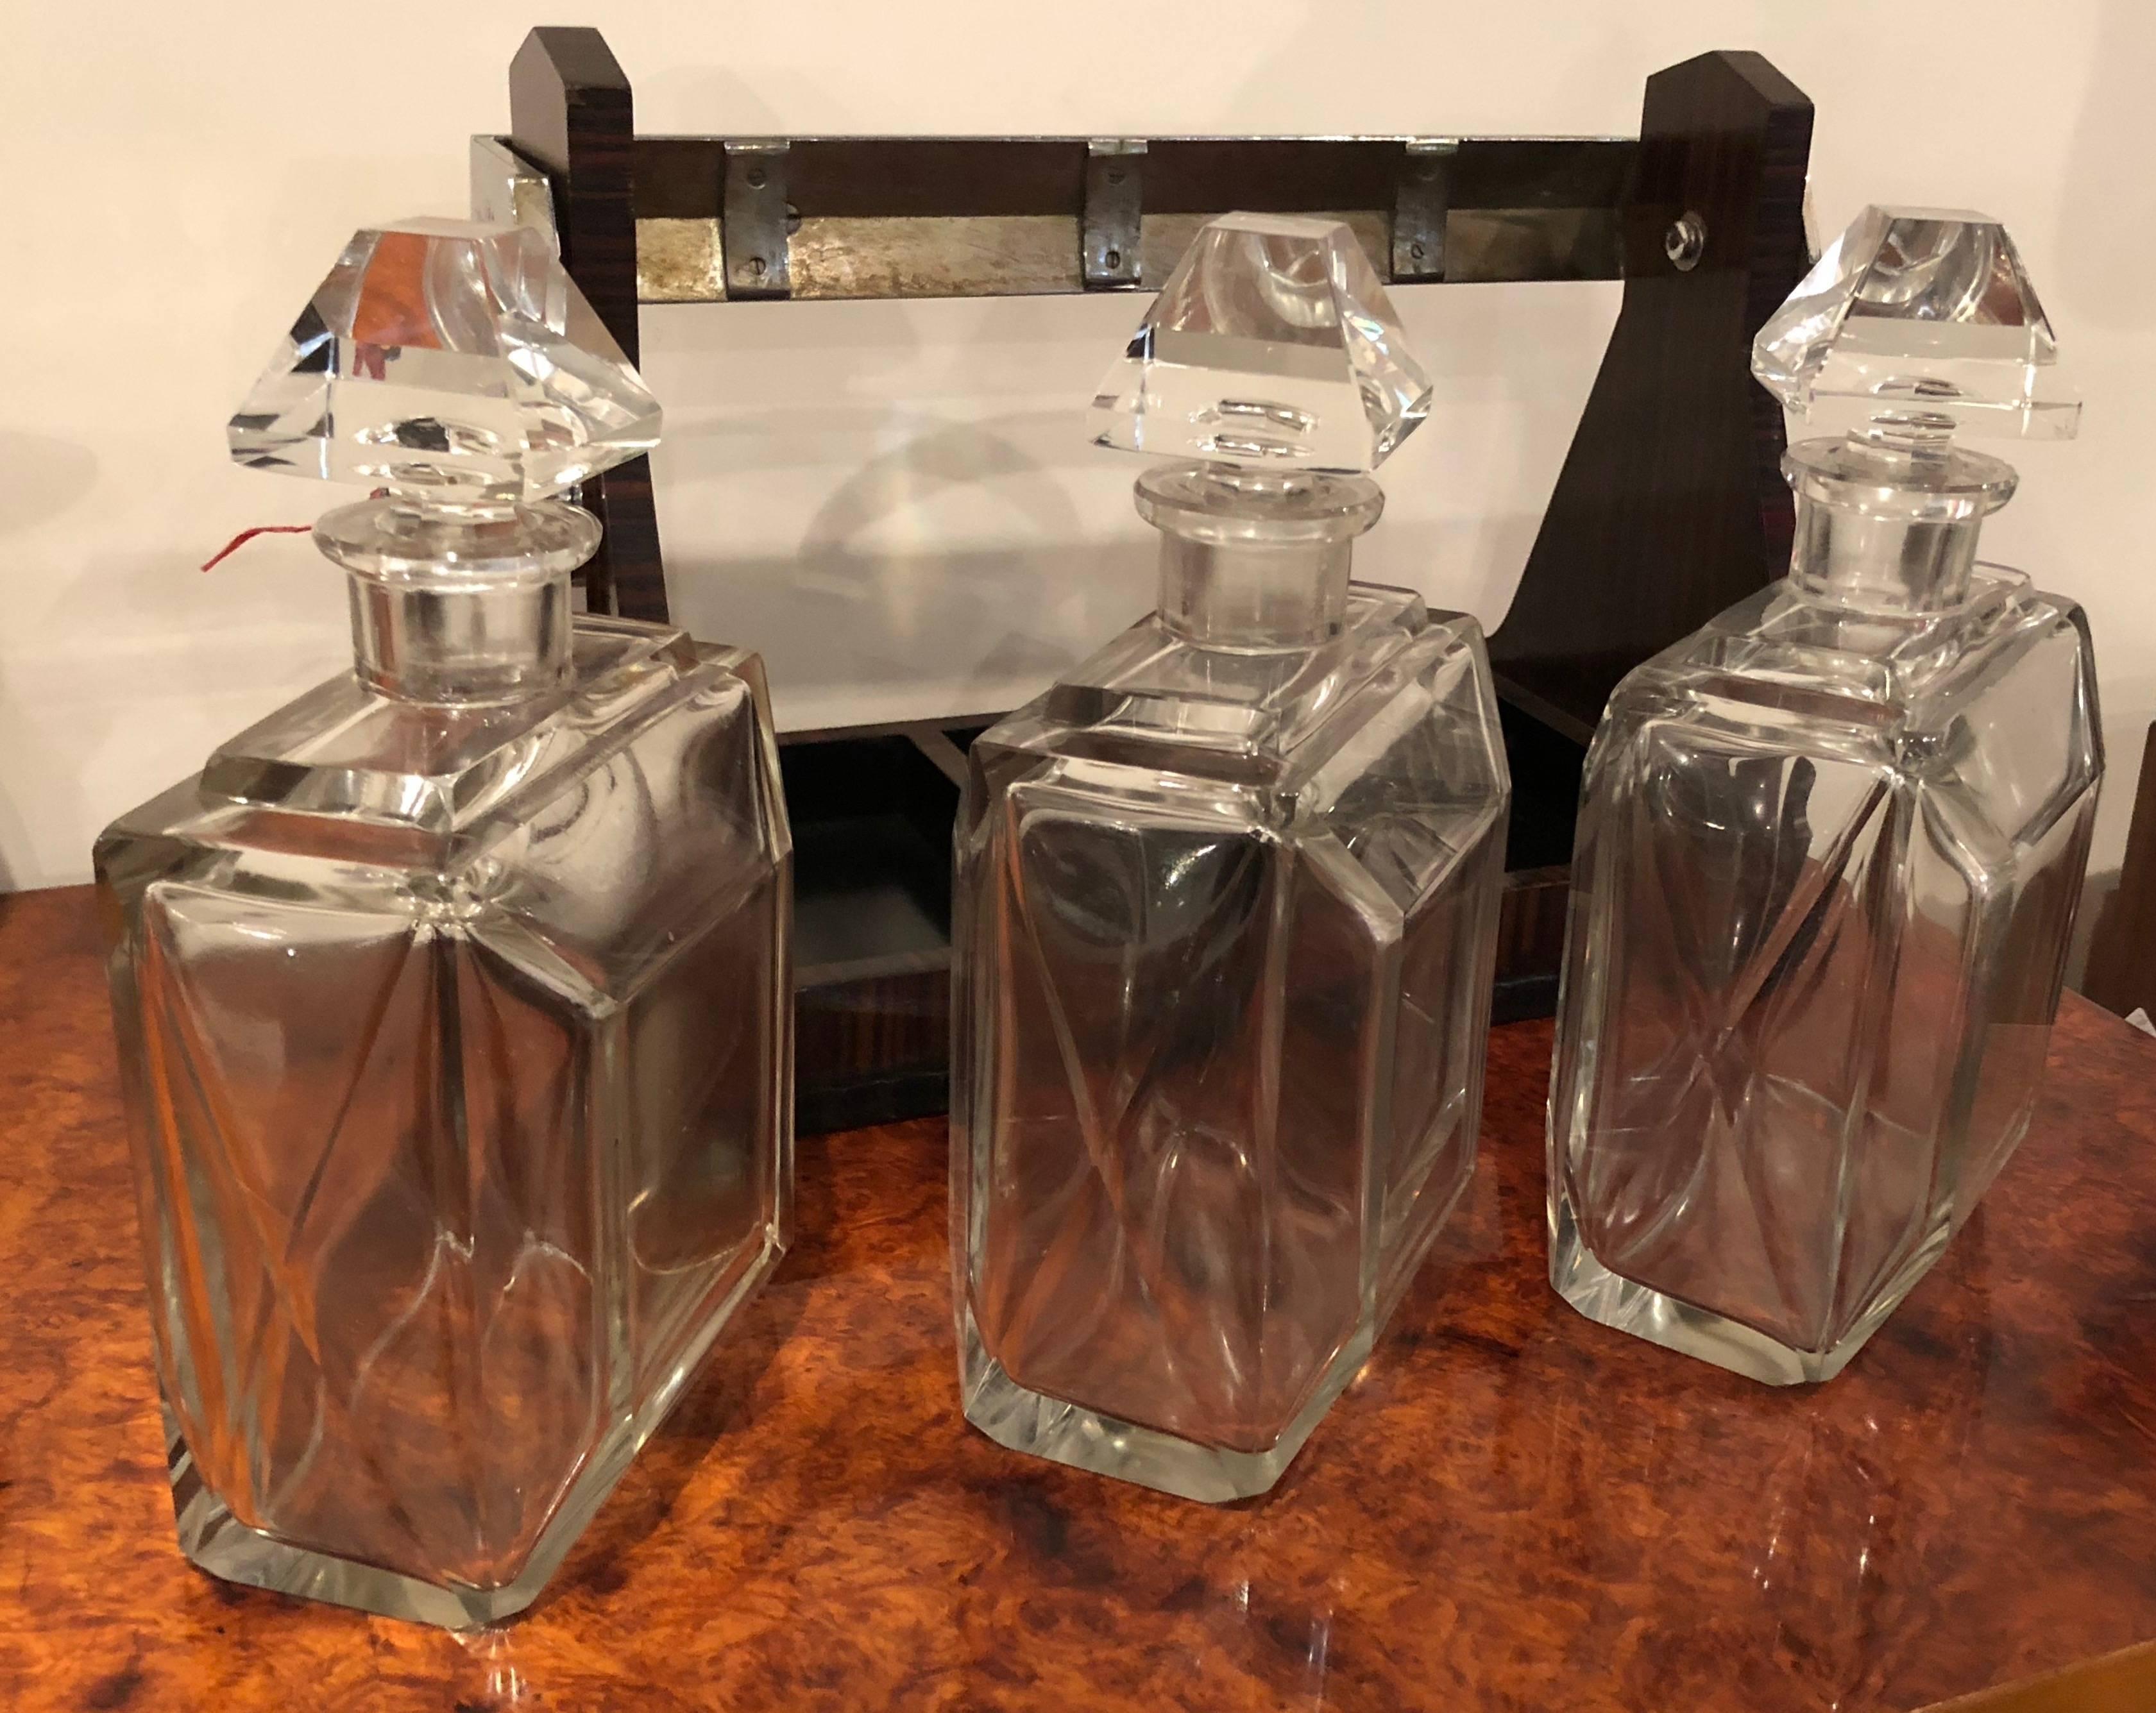 Silver-mounted Macassar tantalus, with a patent mark of George Betjemann & Sons, London circa 1925-1930. A unique set with a very modernist approach, stunning cut crystal decanters with matching tops, all in excellent original condition. The company